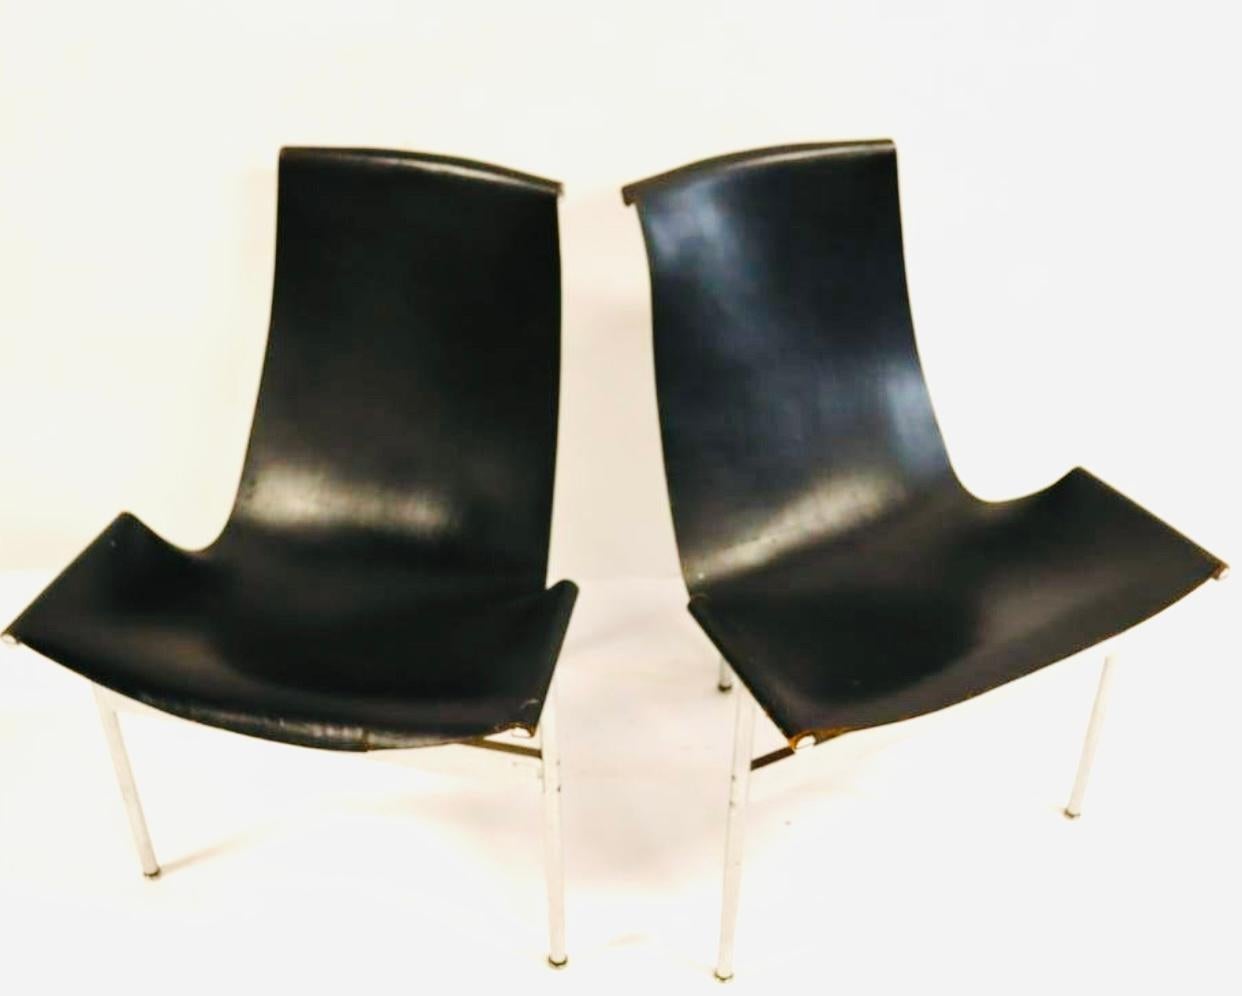 Pair of iconic T side chairs in thick saddle leather and chromed steel frames by Katavolos, Littell and Kelly for Laverne International. A very forward design for 1952, especially considering what the rest of the design world was doing. With the